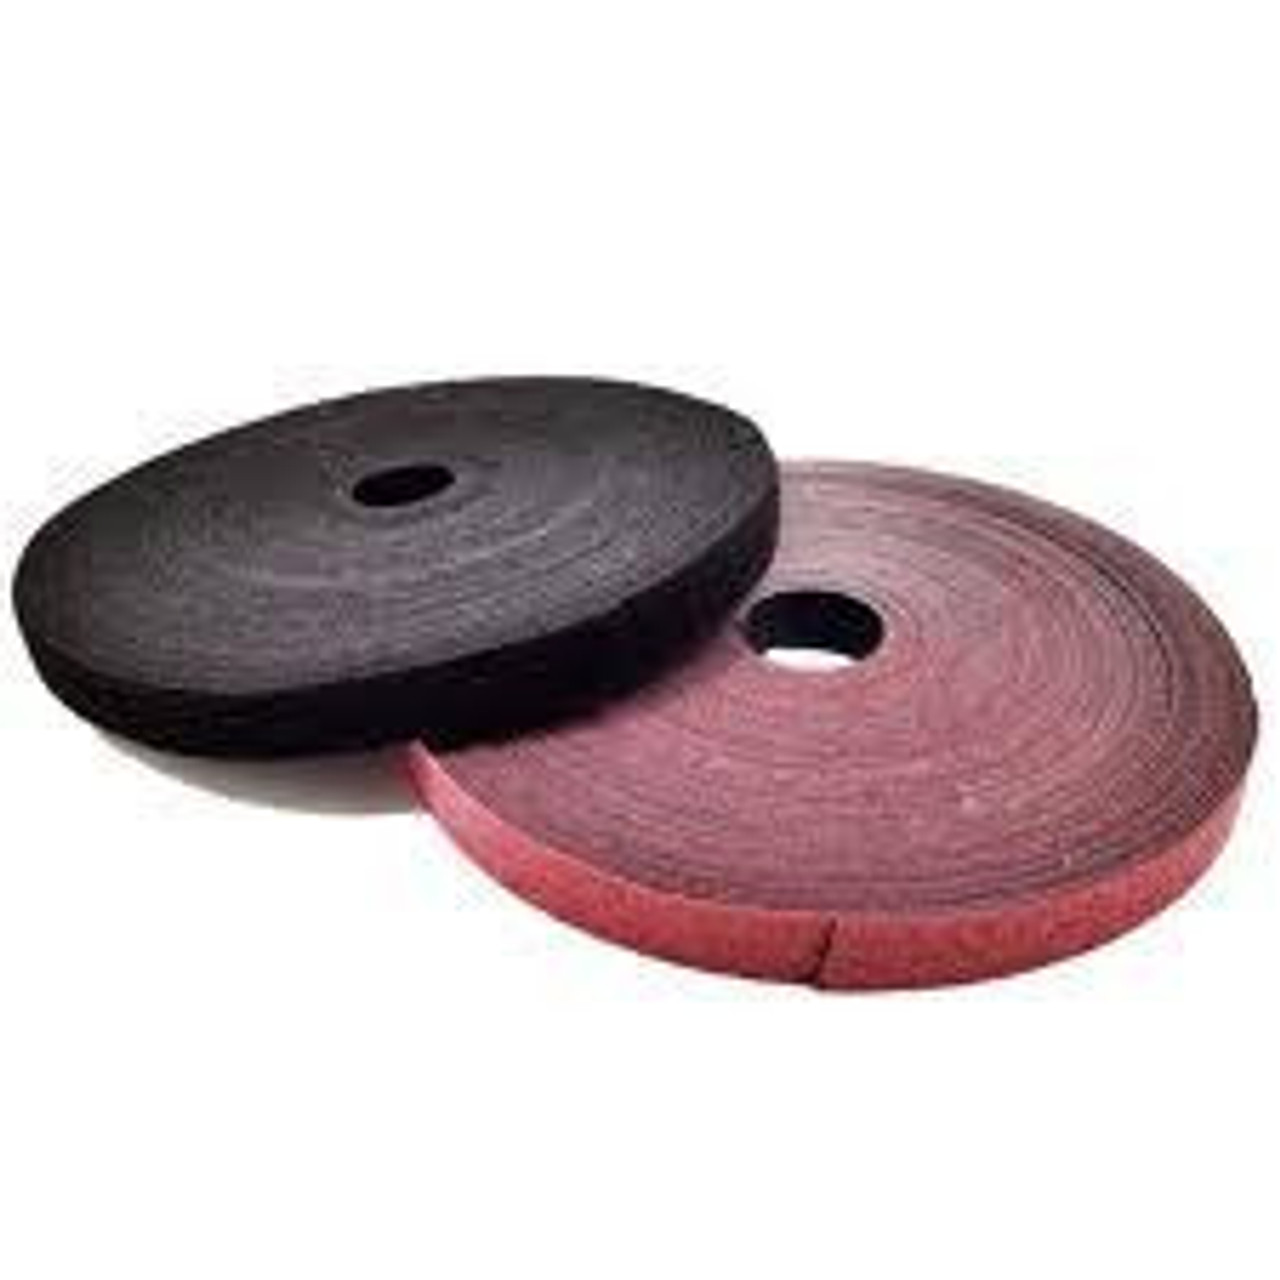 VELCRO® Brand ONE-WRAP® Tape 4 x 25 yard roll sold by Industrial Webbing  Corp